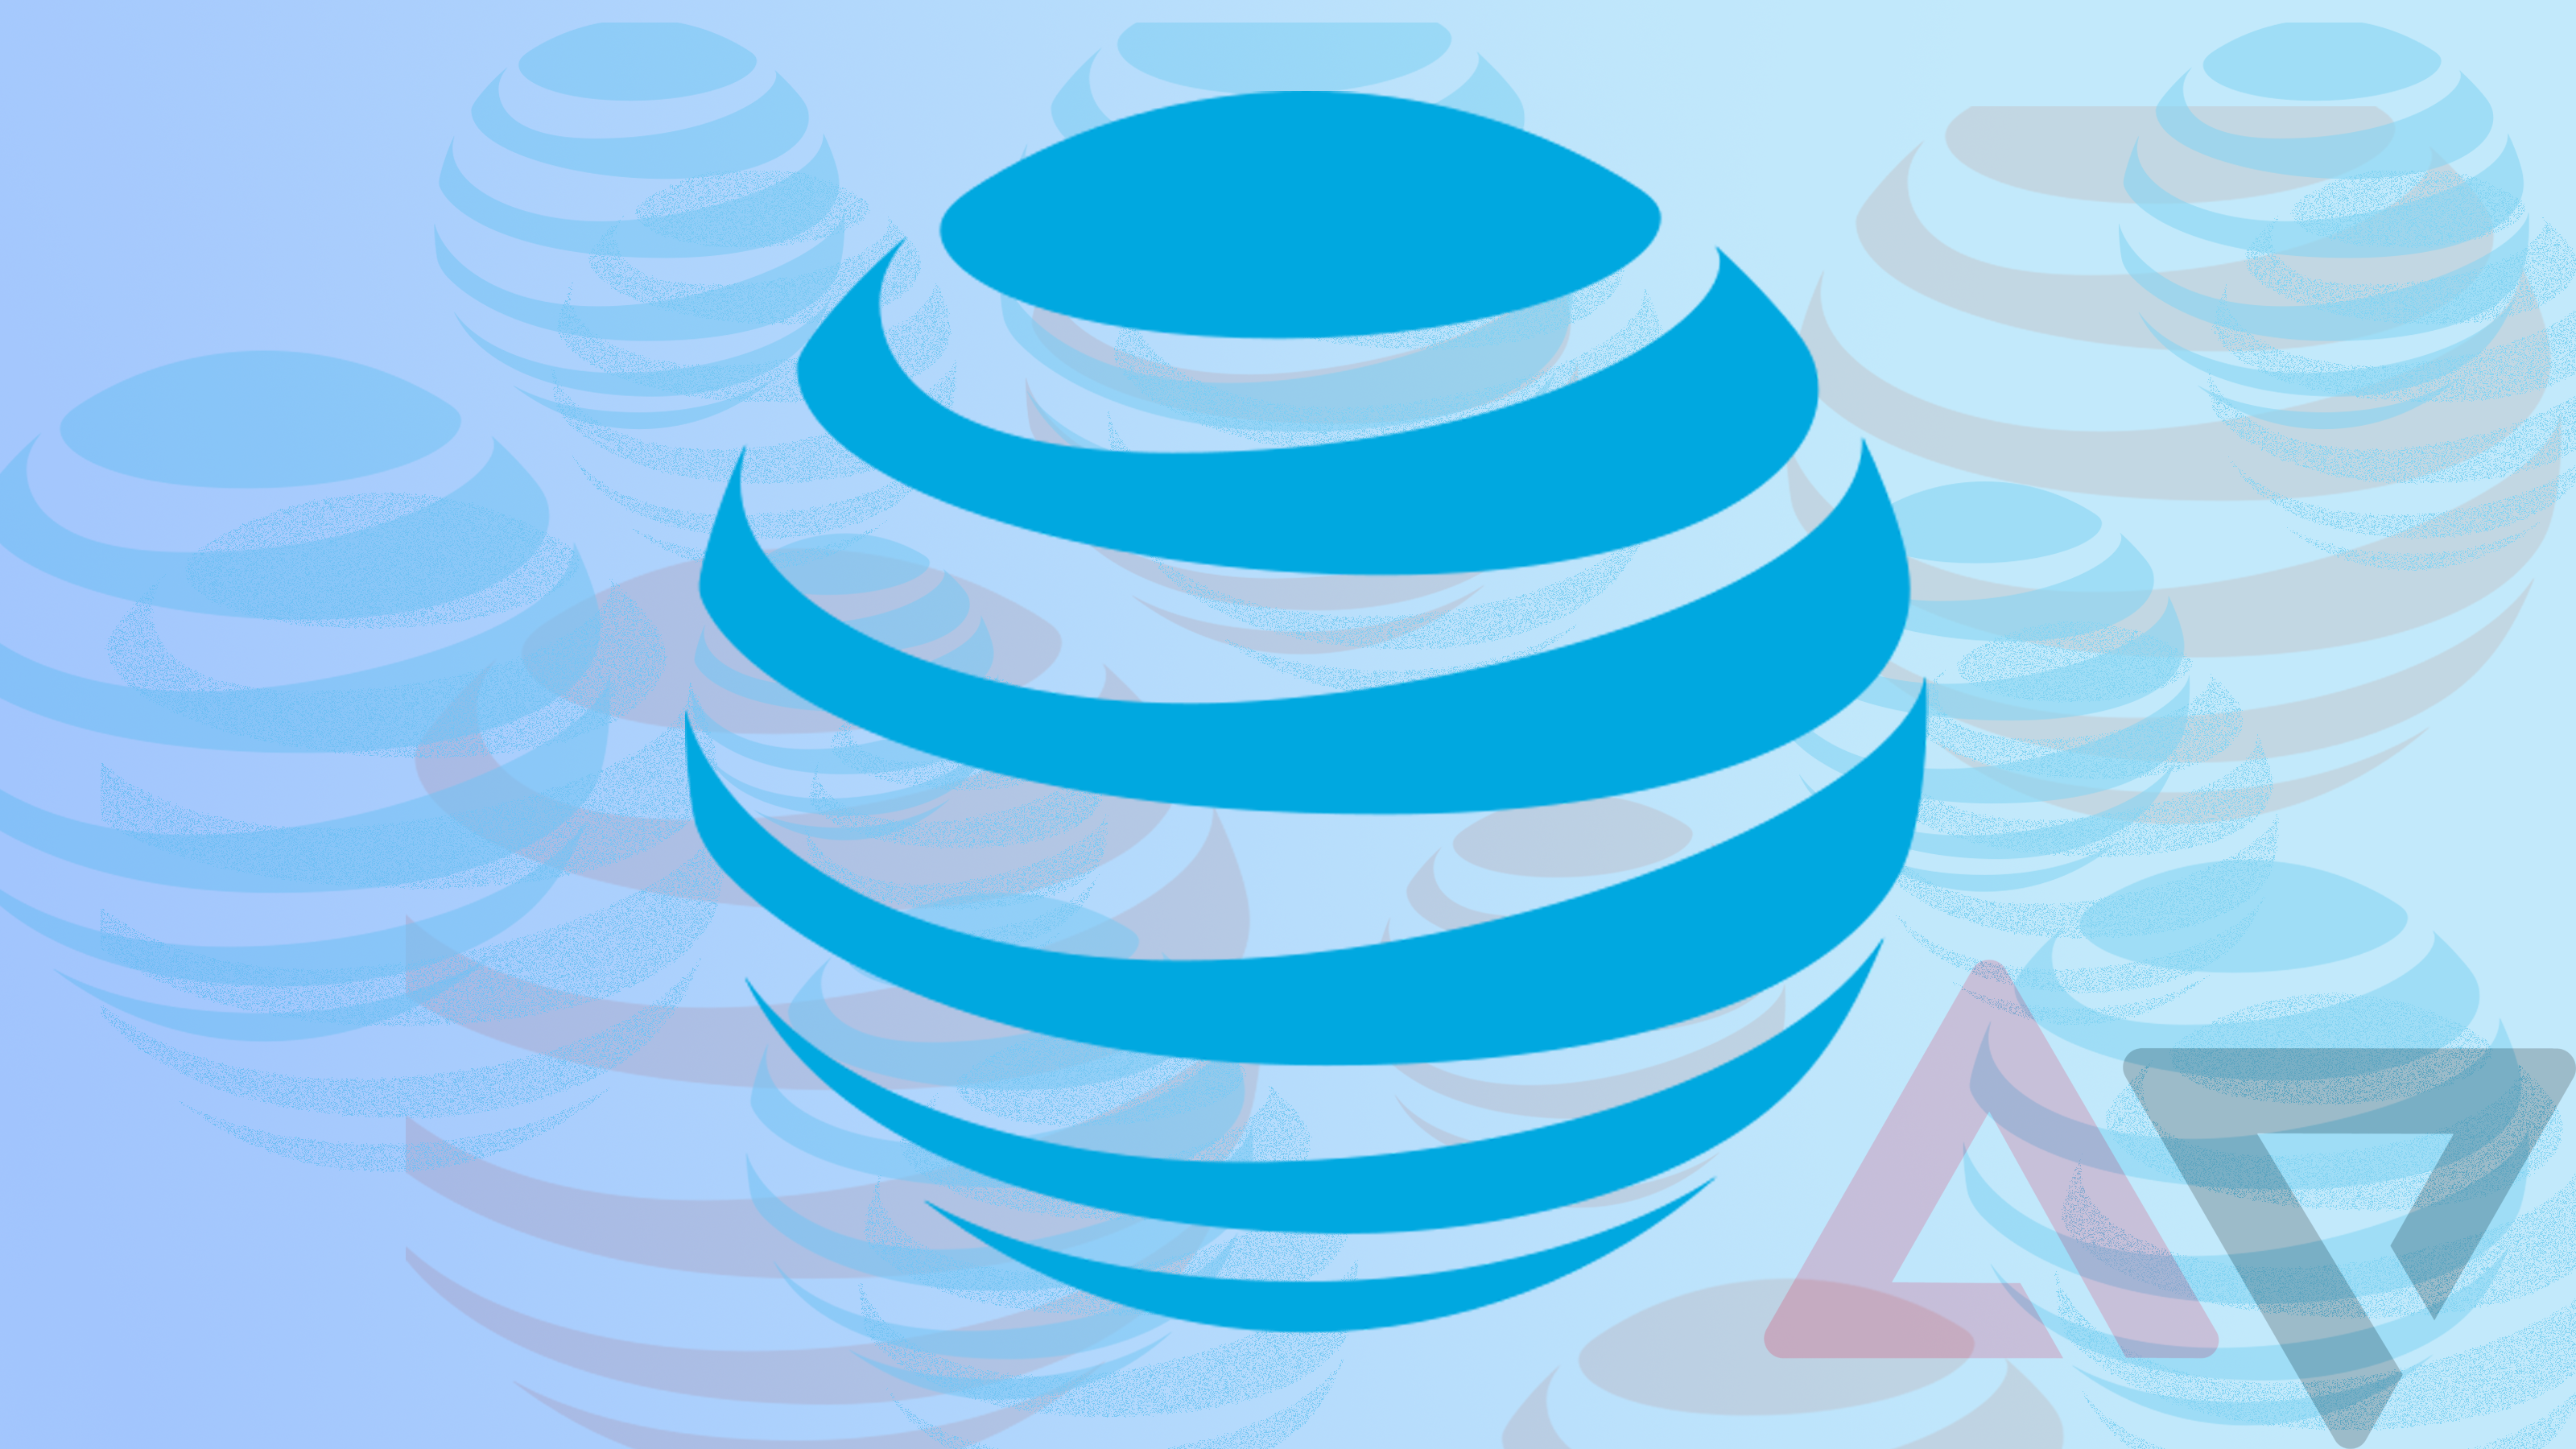 How to port your number from AT&T to another carrier